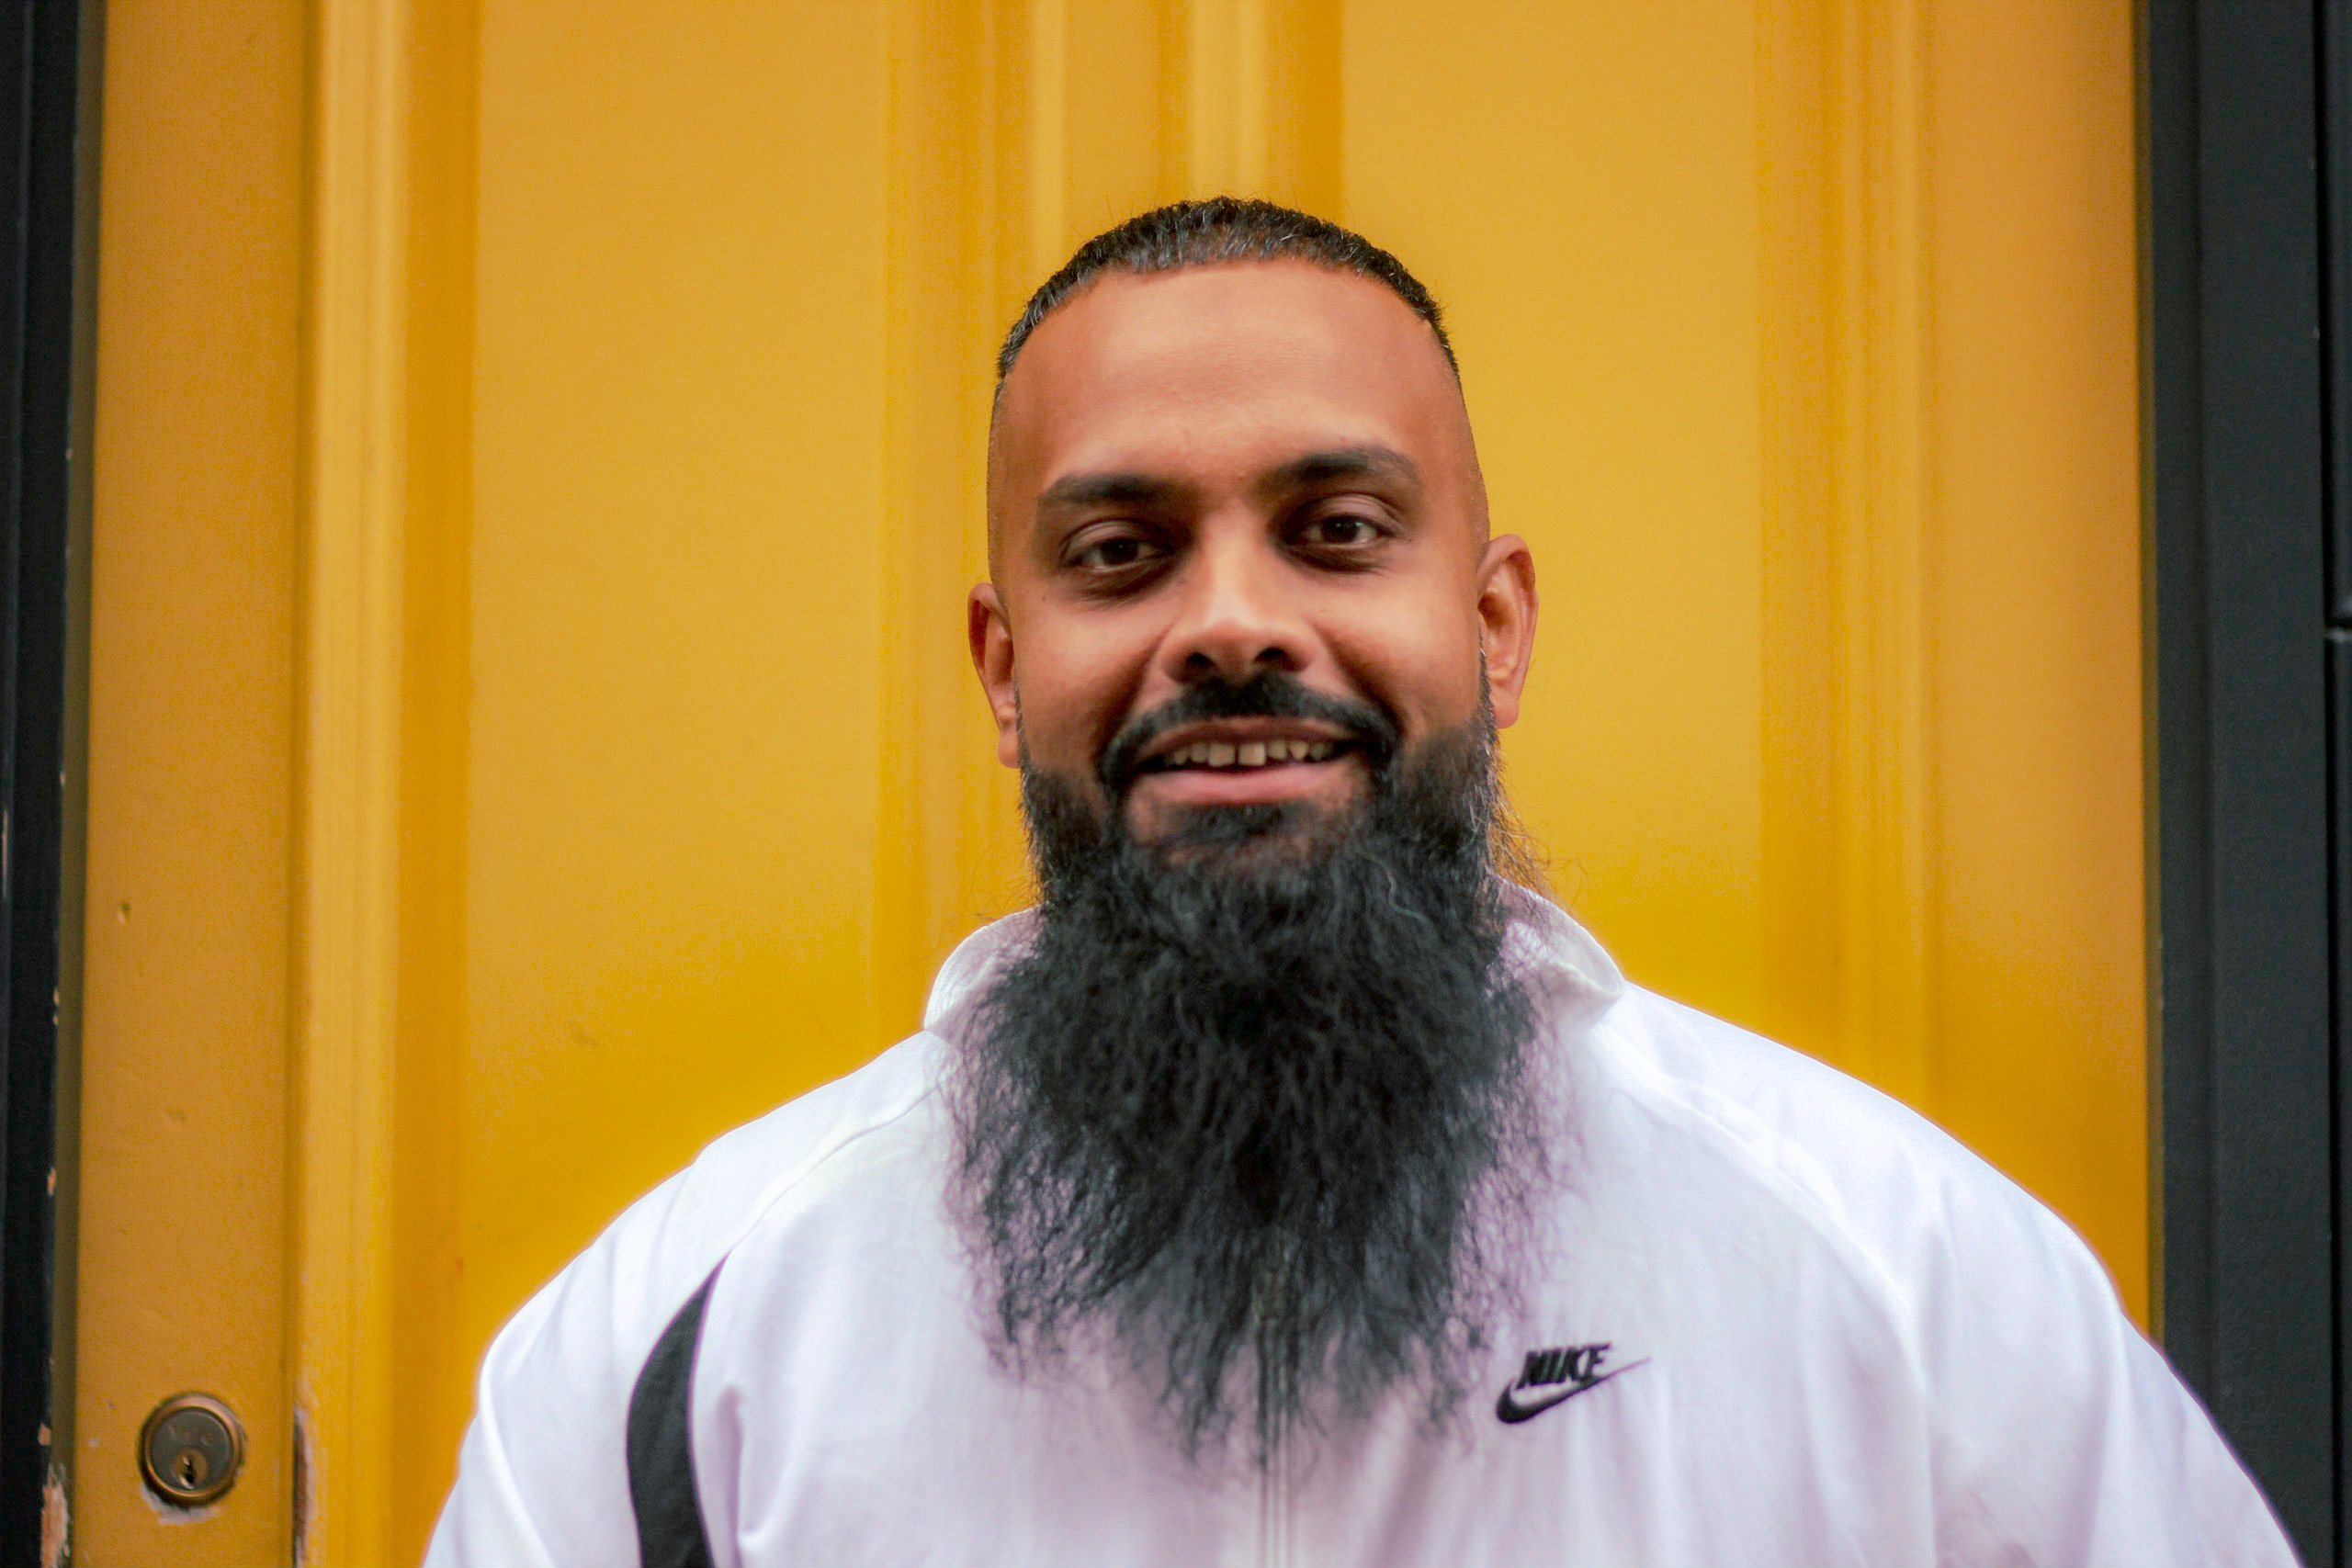 Picture of Guz Khan wearing a white Nike jacket, standing against a yellow background.